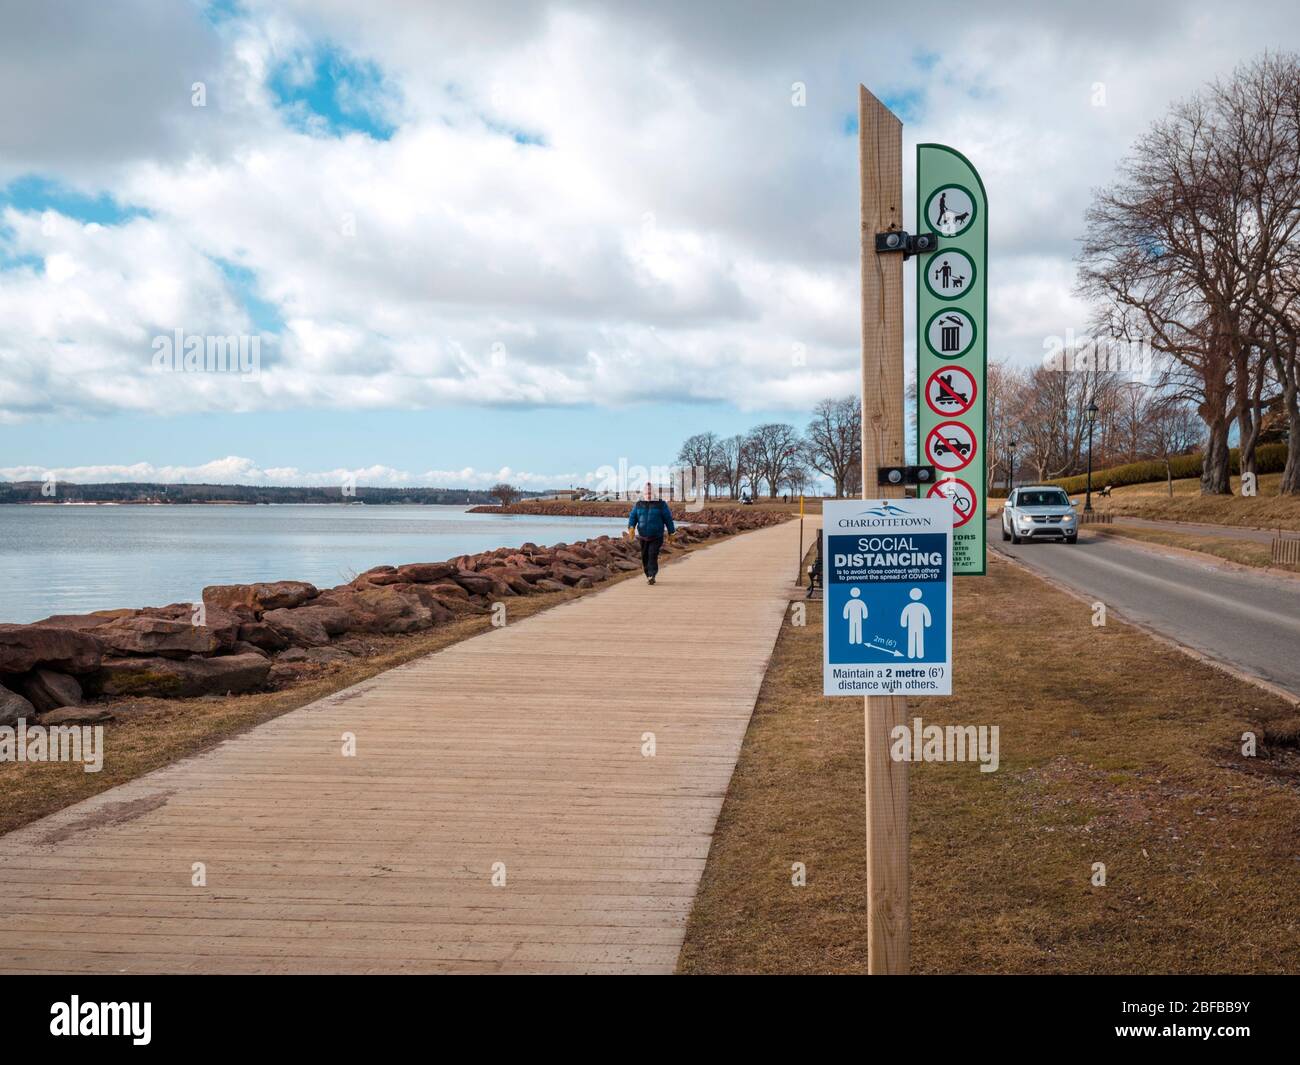 A social distance instruction sign at Victoria Park in Charlottetown, PEI, Canada Stock Photo